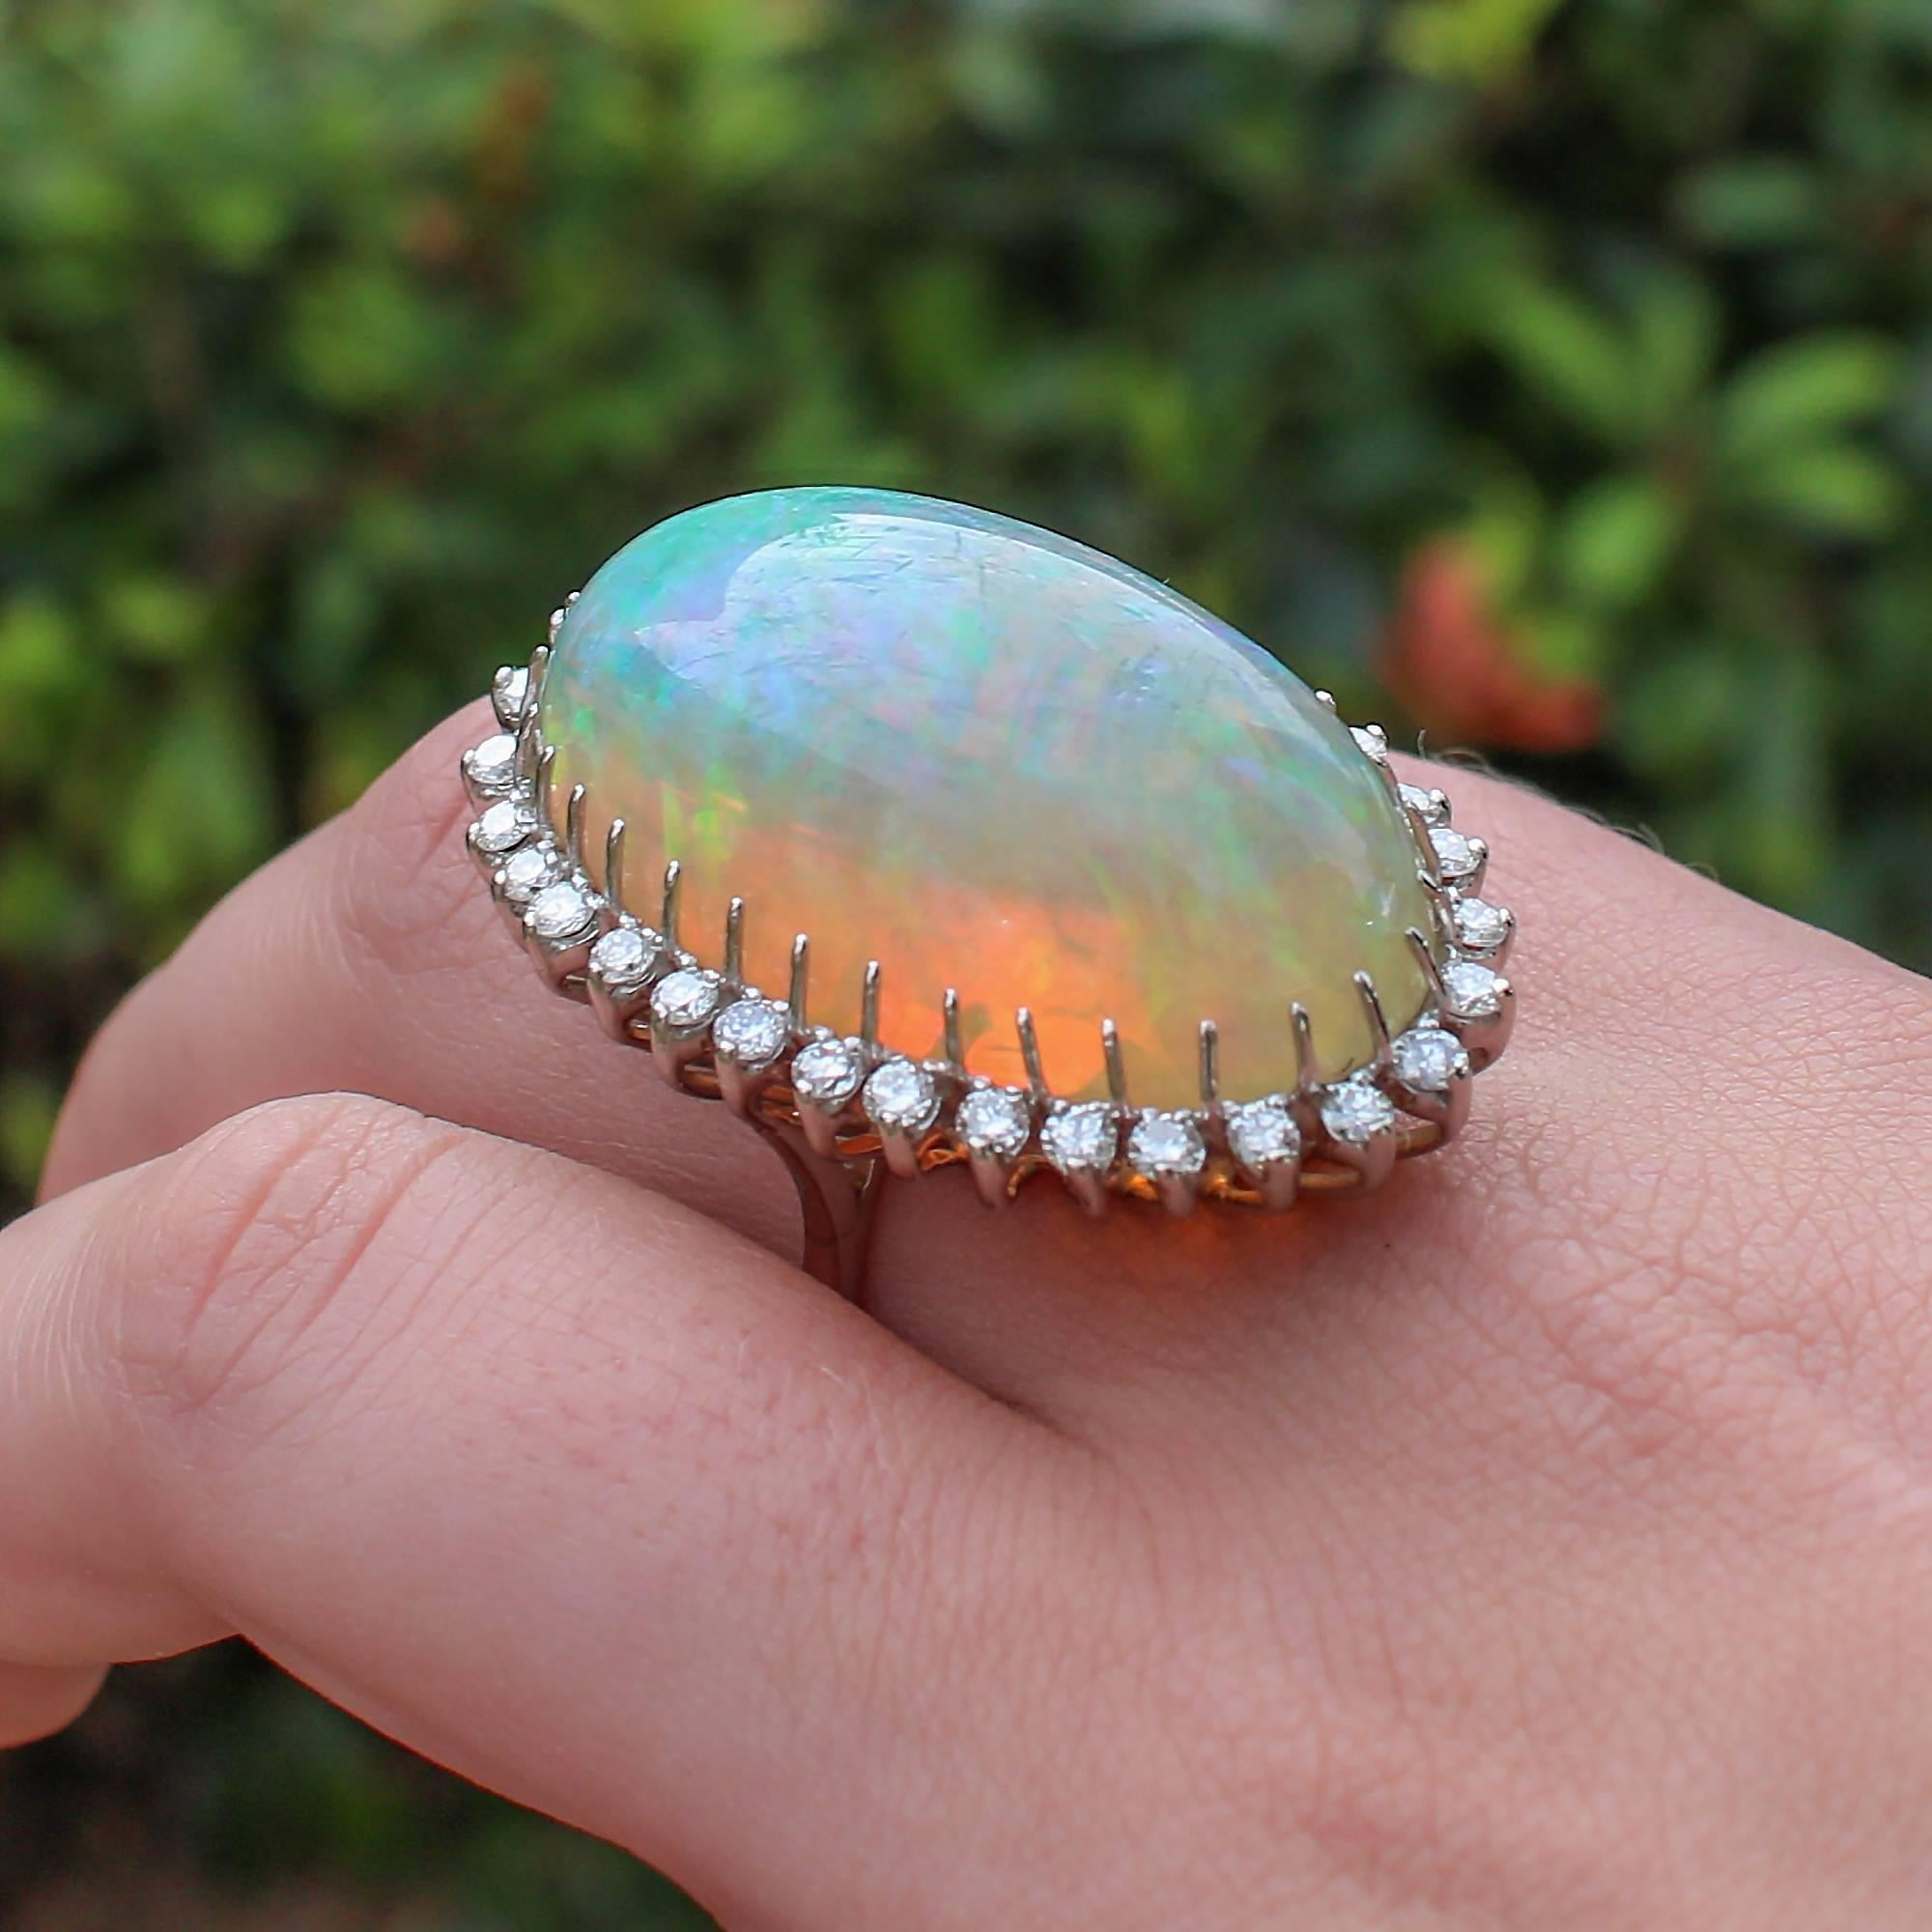 1960s-70s Modernist 47.05 Carat Cabochon Opal Ring with Diamond Halo 2